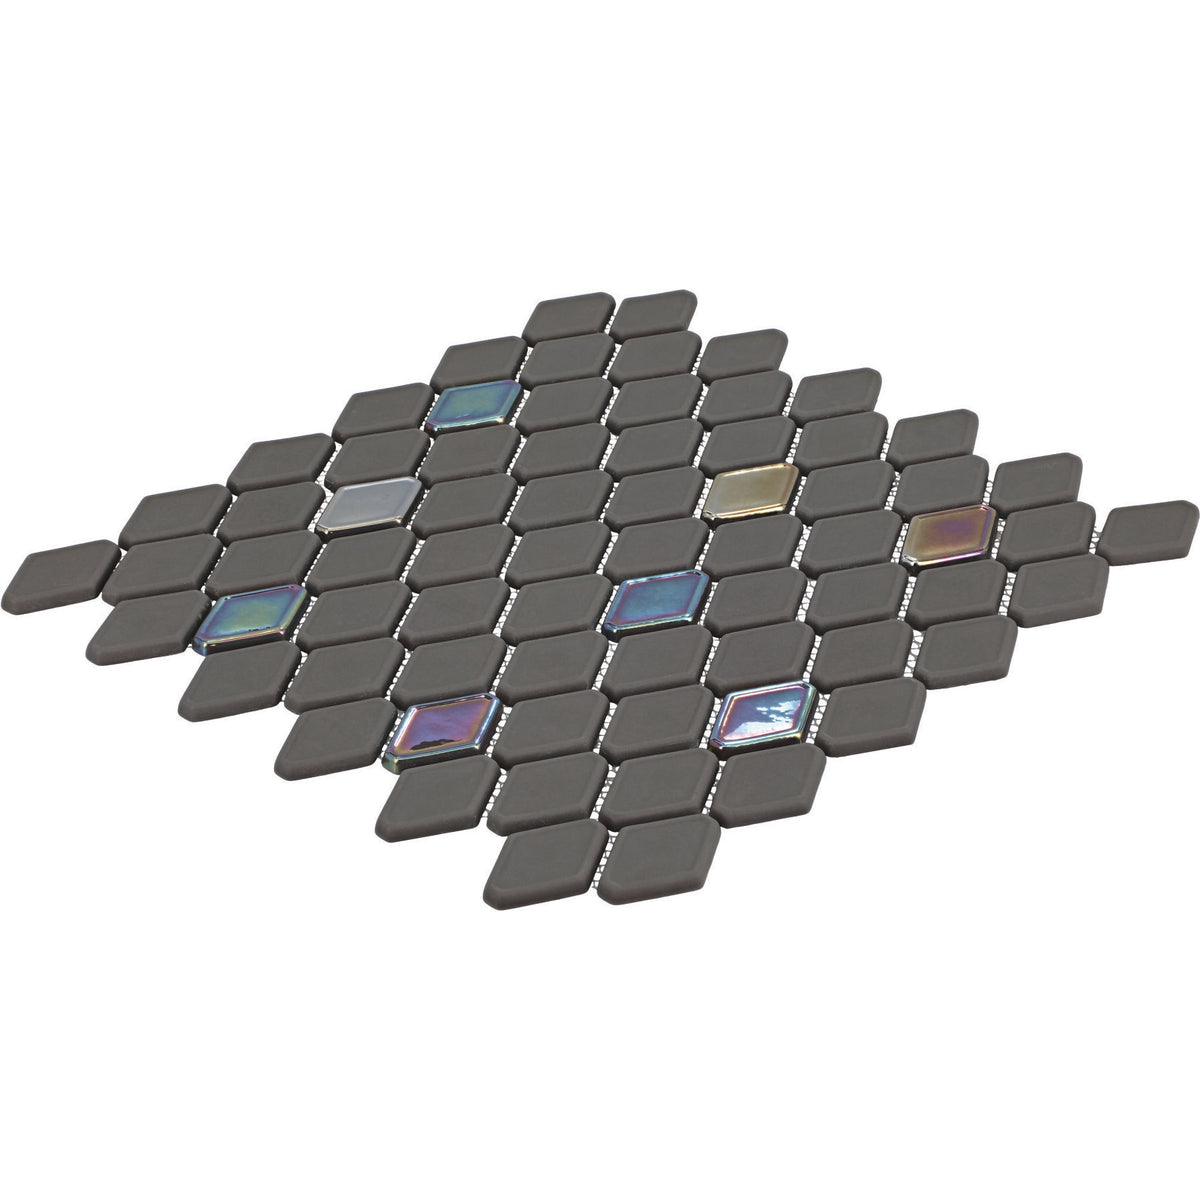 Daltile - Starcastle Glass Elongated Hexagon Mosaic - Stardust Angled View